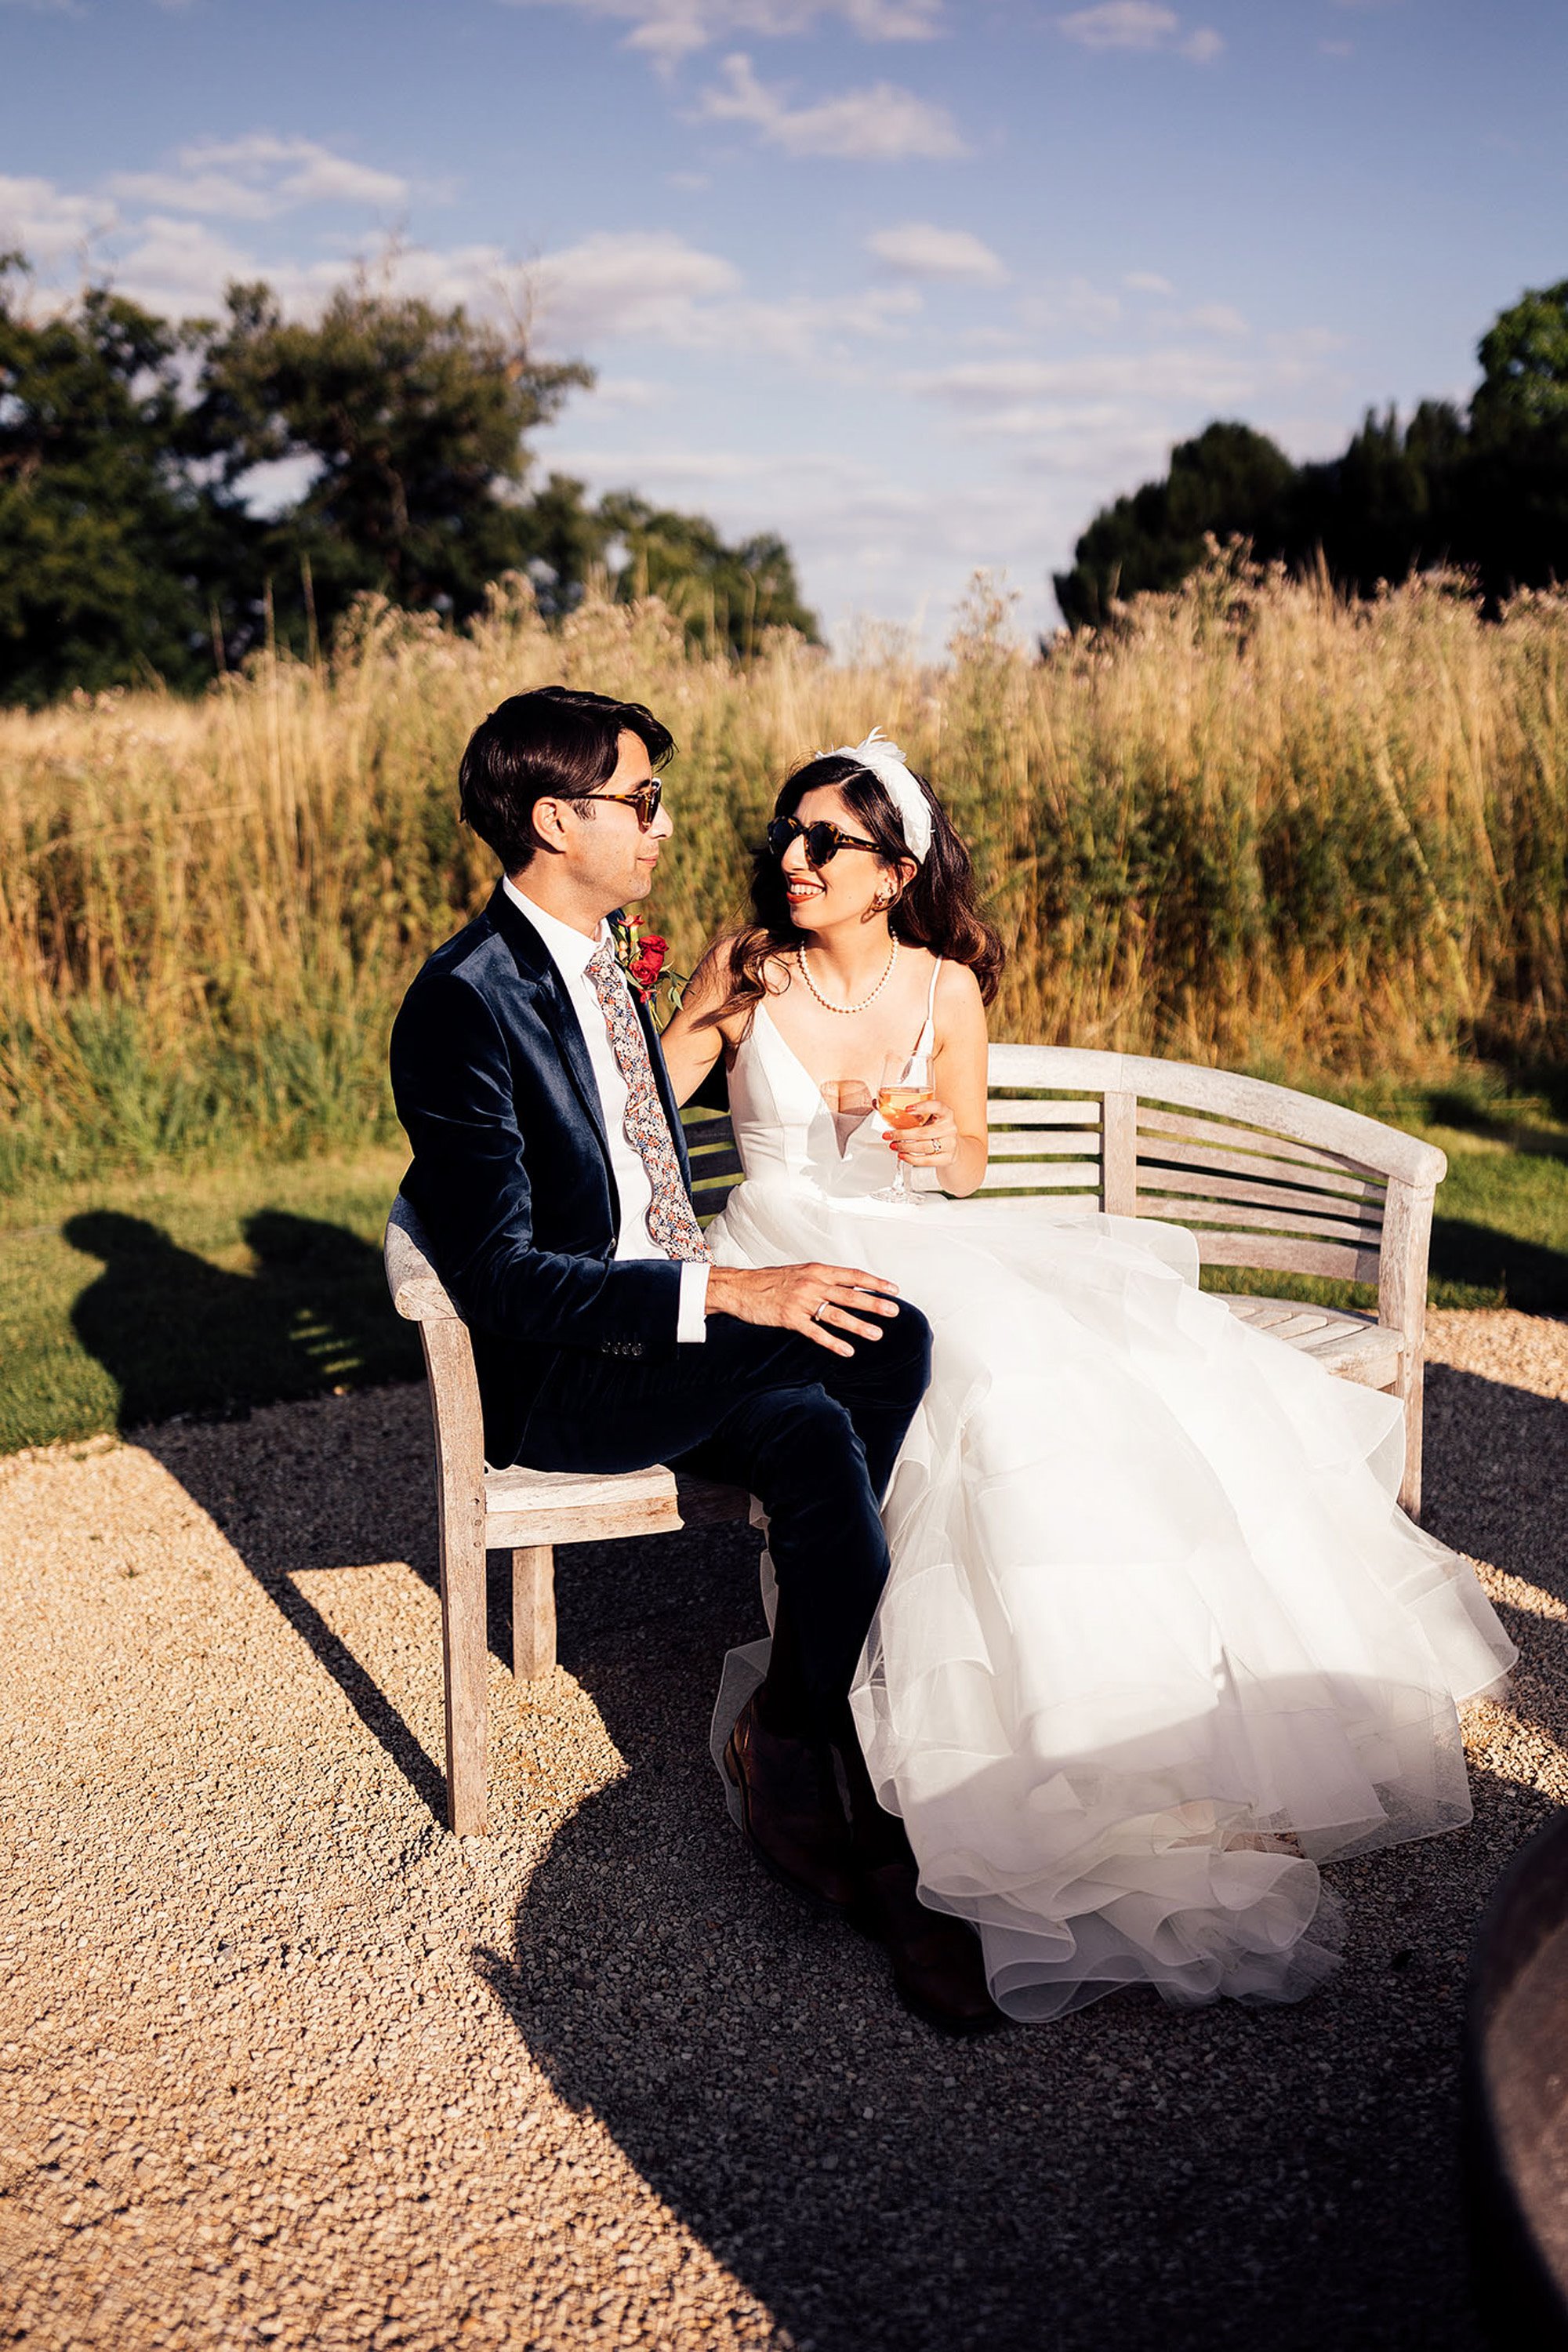 Gorgeous Persian Cool bride and groom sit on bench in meadow in sunshine wearing sunglasses. Bride wears pearls, headpiece and full dress and red lipstick, groom wears velvet suits and floral tie